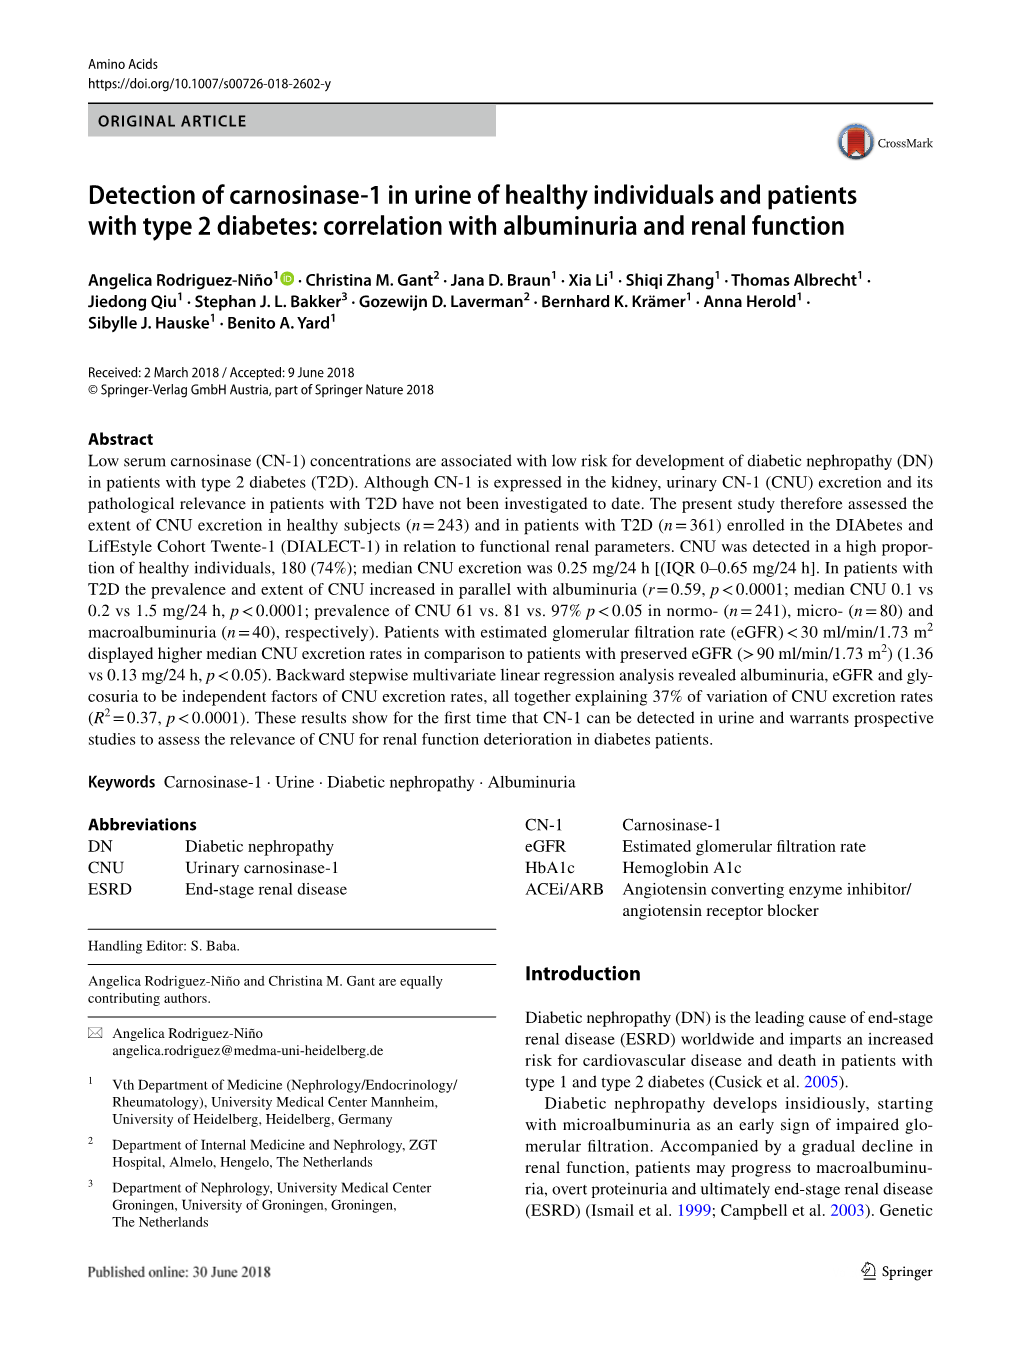 Detection of Carnosinase-1 in Urine of Healthy Individuals and Patients with Type 2 Diabetes:…